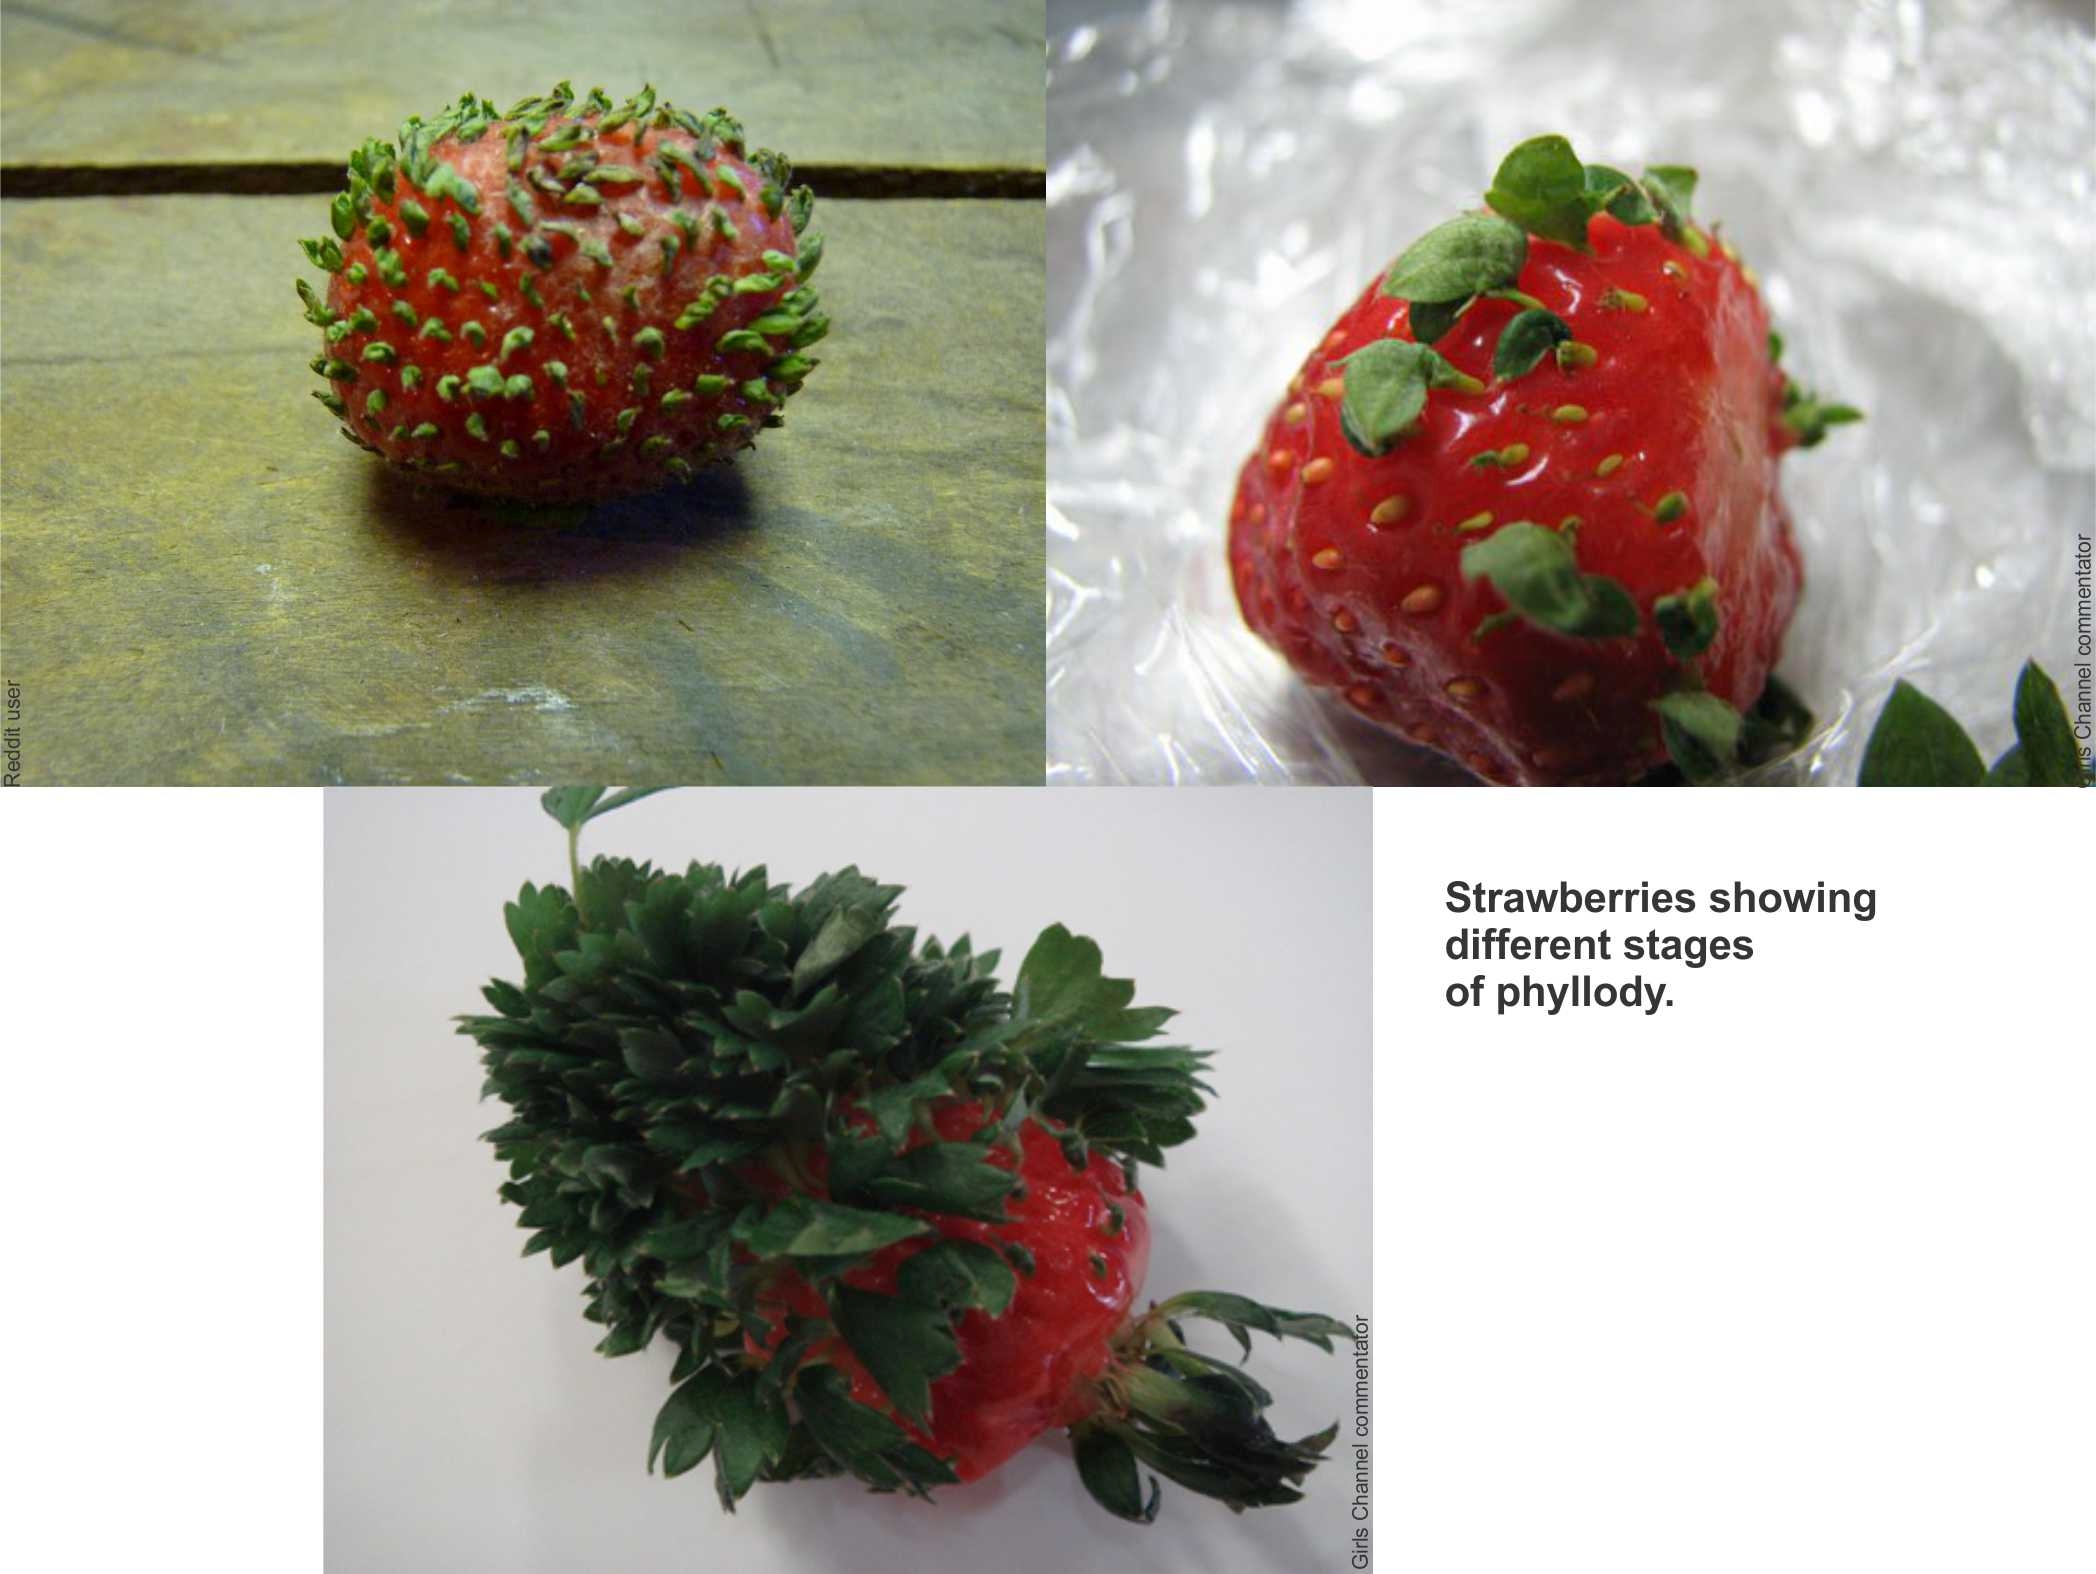 Strawberries Mold Image & Photo (Free Trial)